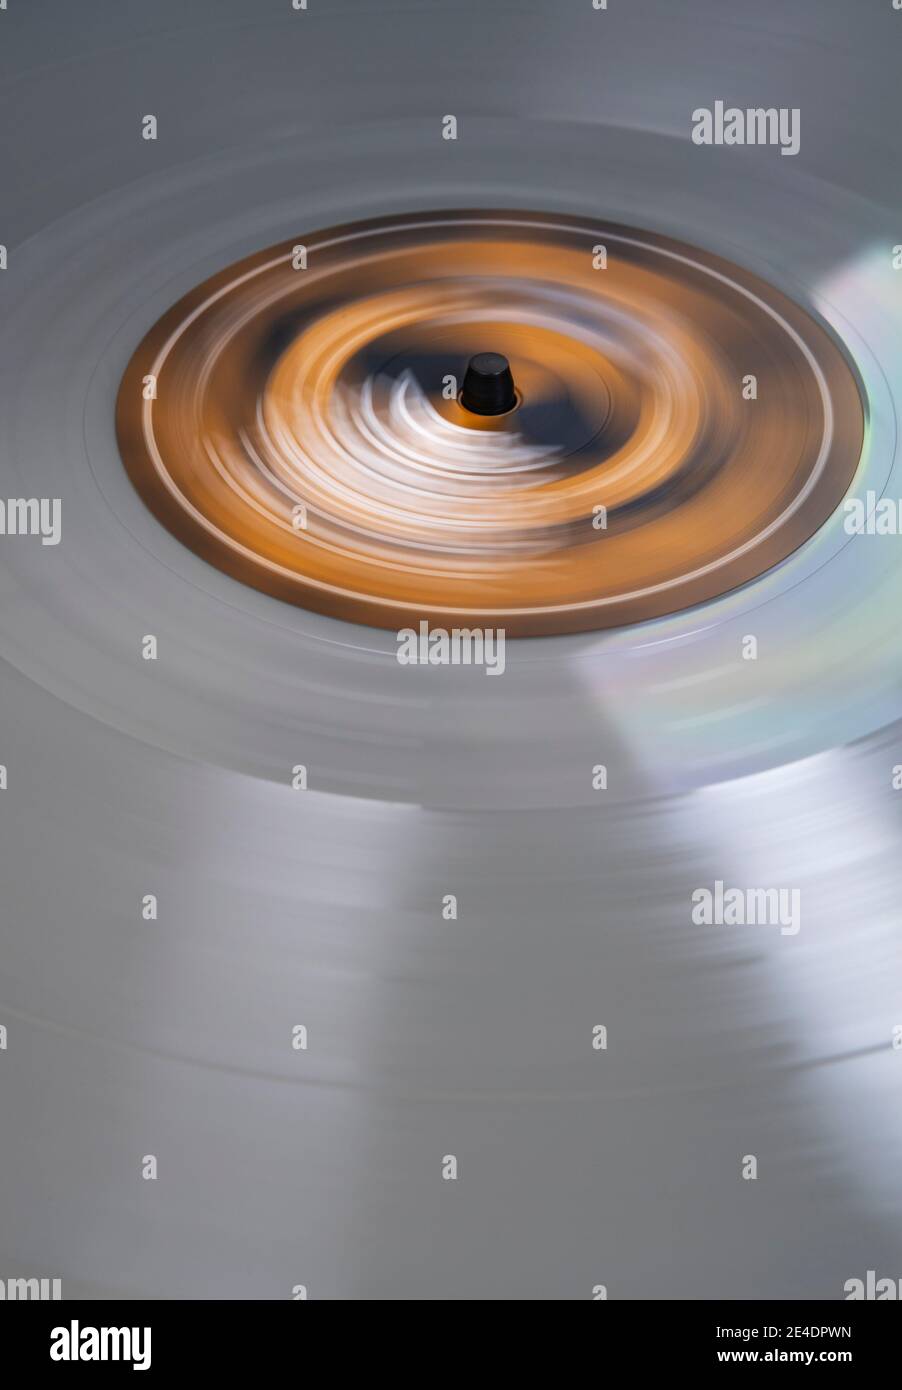 Detail of a spinning vinyl record Stock Photo